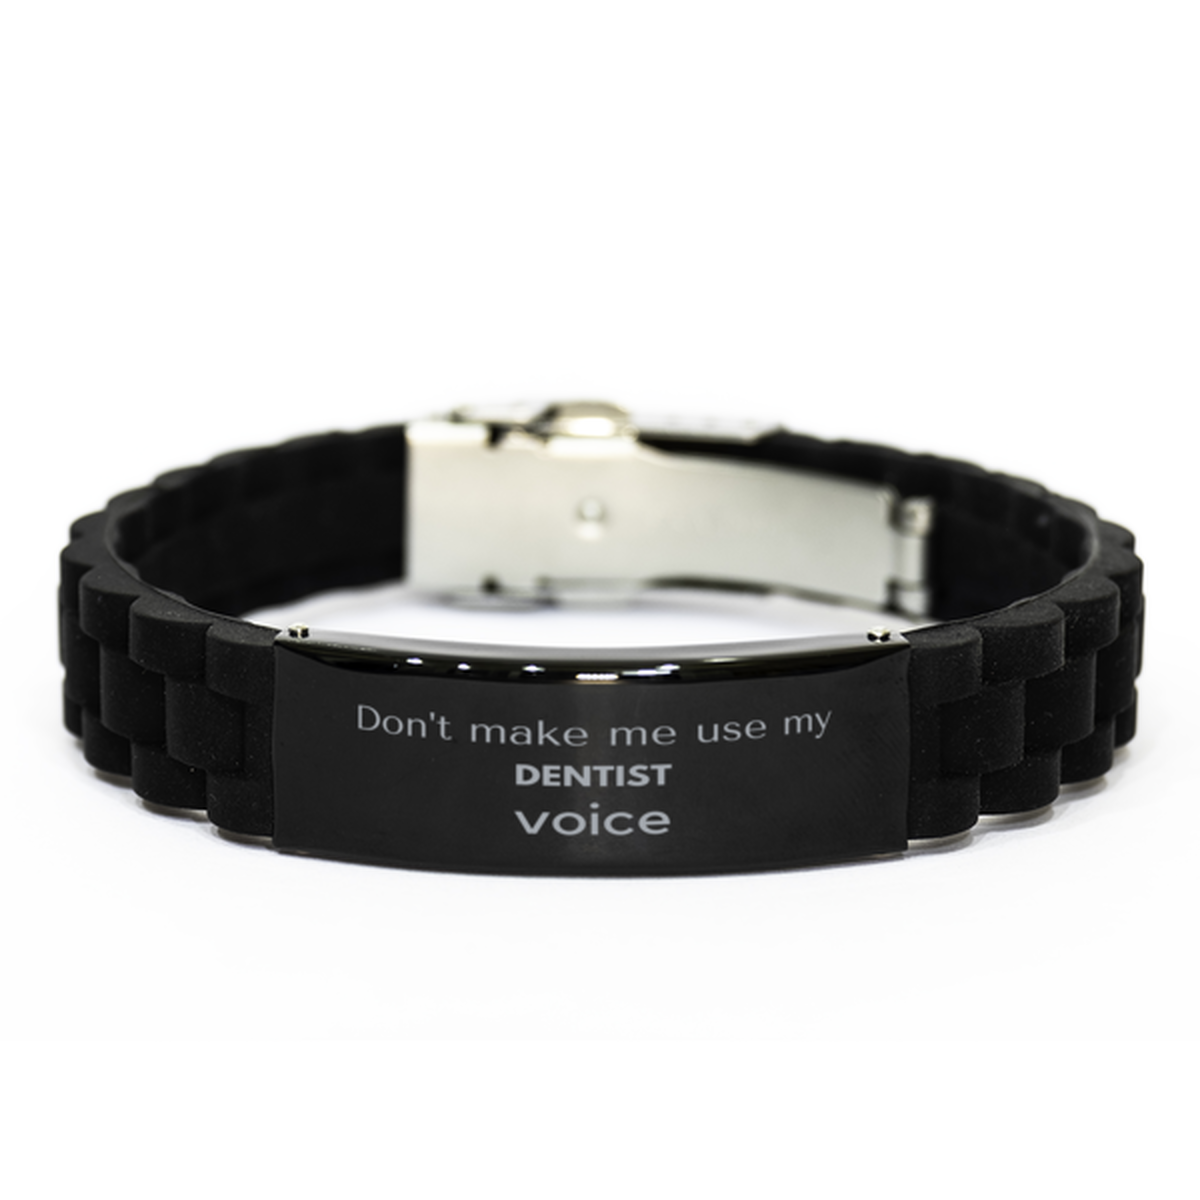 Don't make me use my Dentist voice, Sarcasm Dentist Gifts, Christmas Dentist Black Glidelock Clasp Bracelet Birthday Unique Gifts For Dentist Coworkers, Men, Women, Colleague, Friends